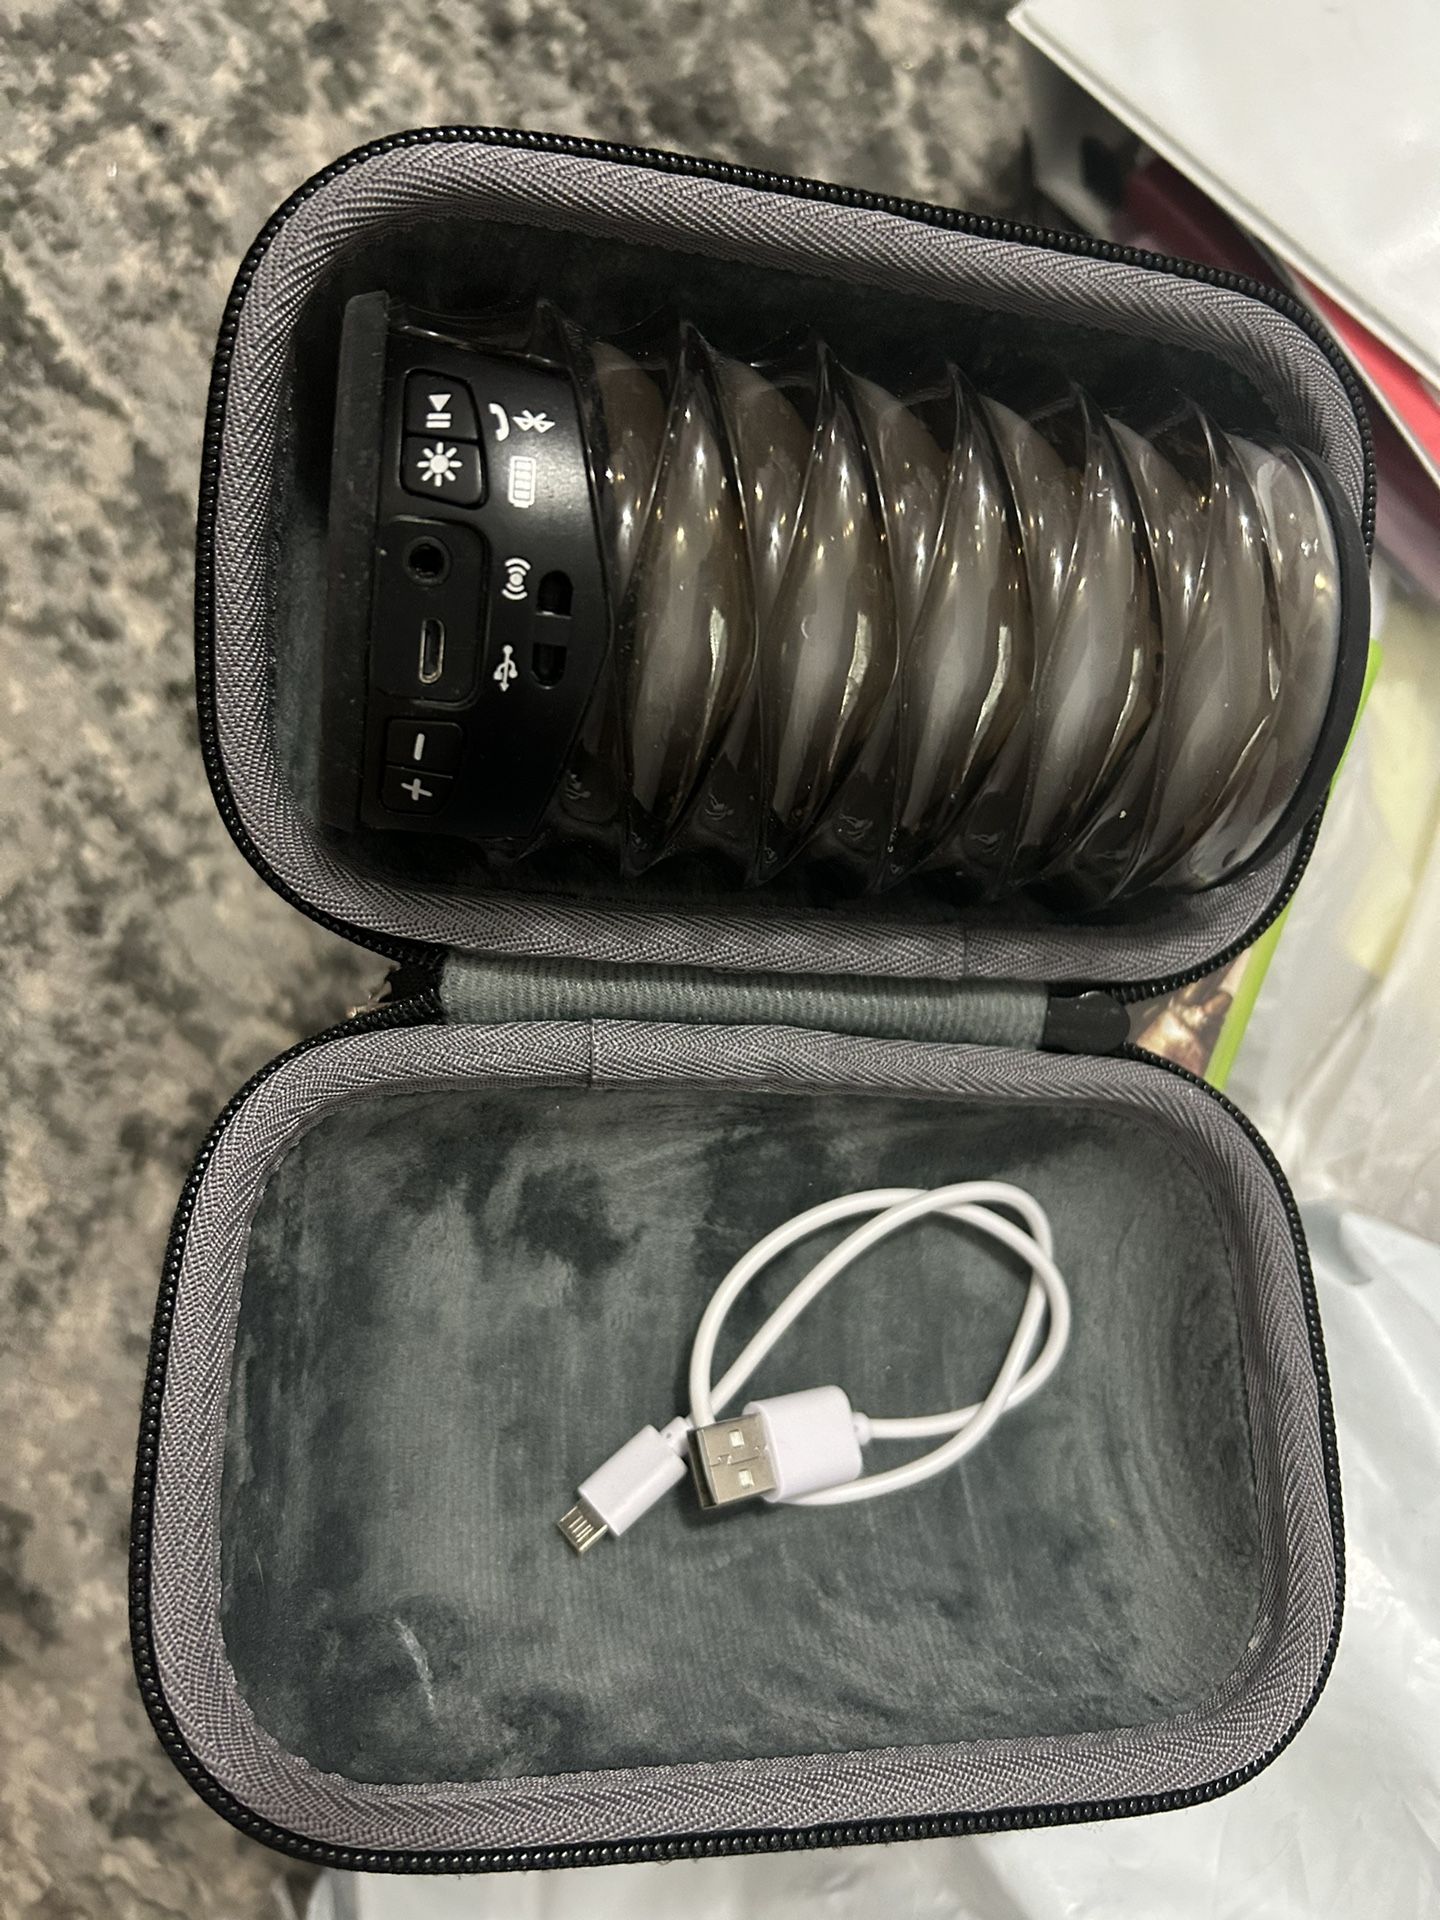 bluetooth speaker with case and charger